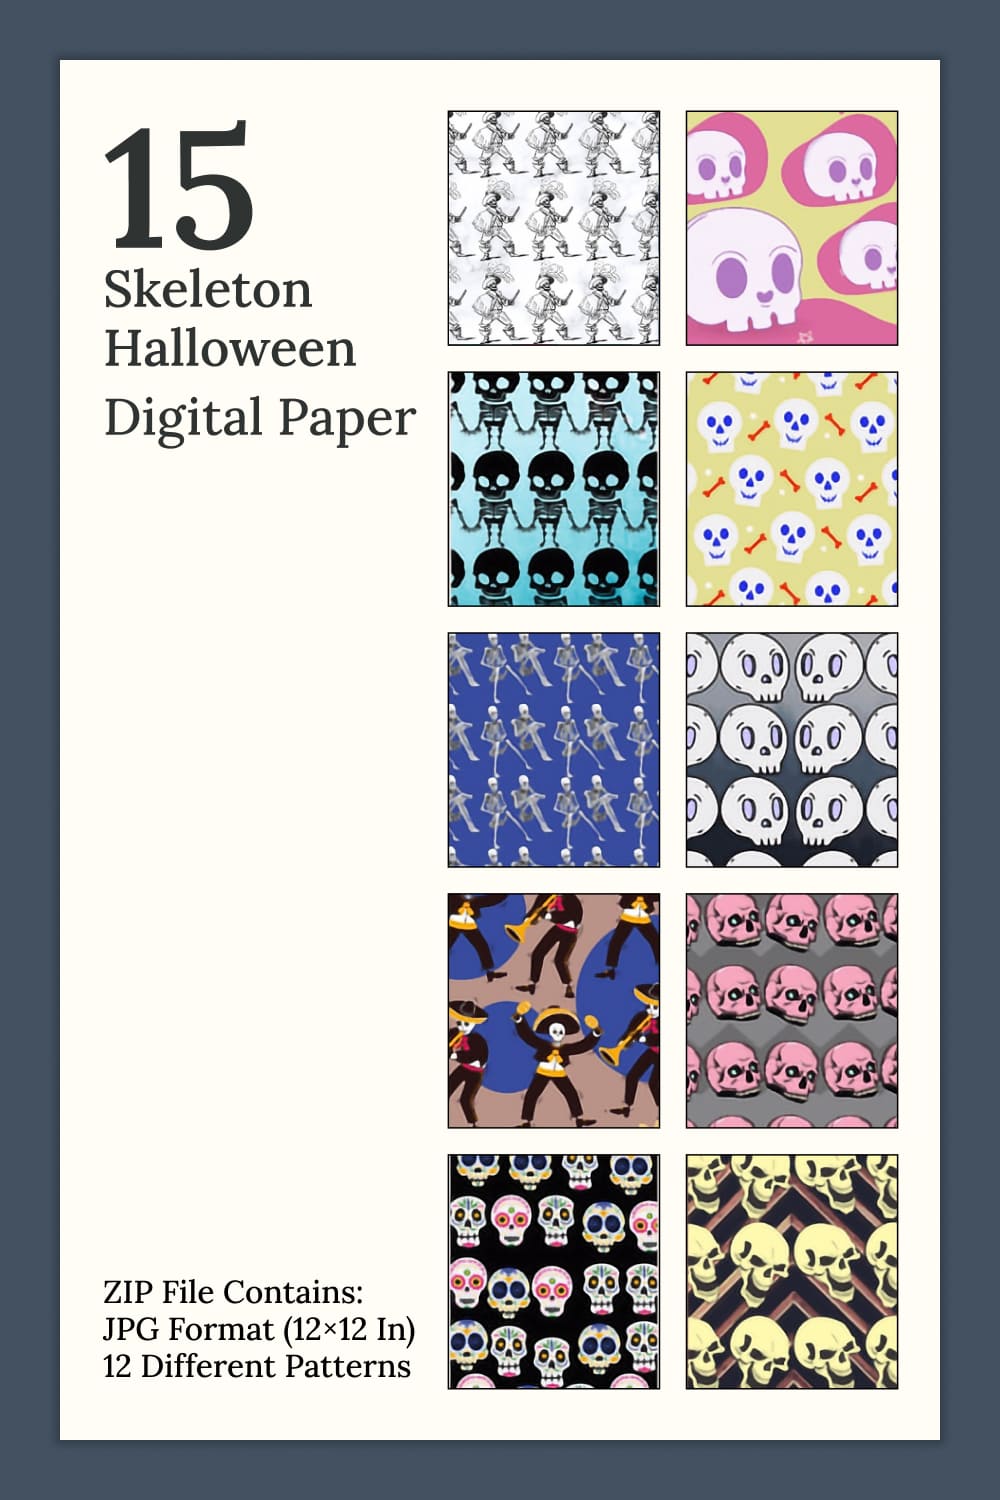 Collection of charming paper retro patterns with skeletons.